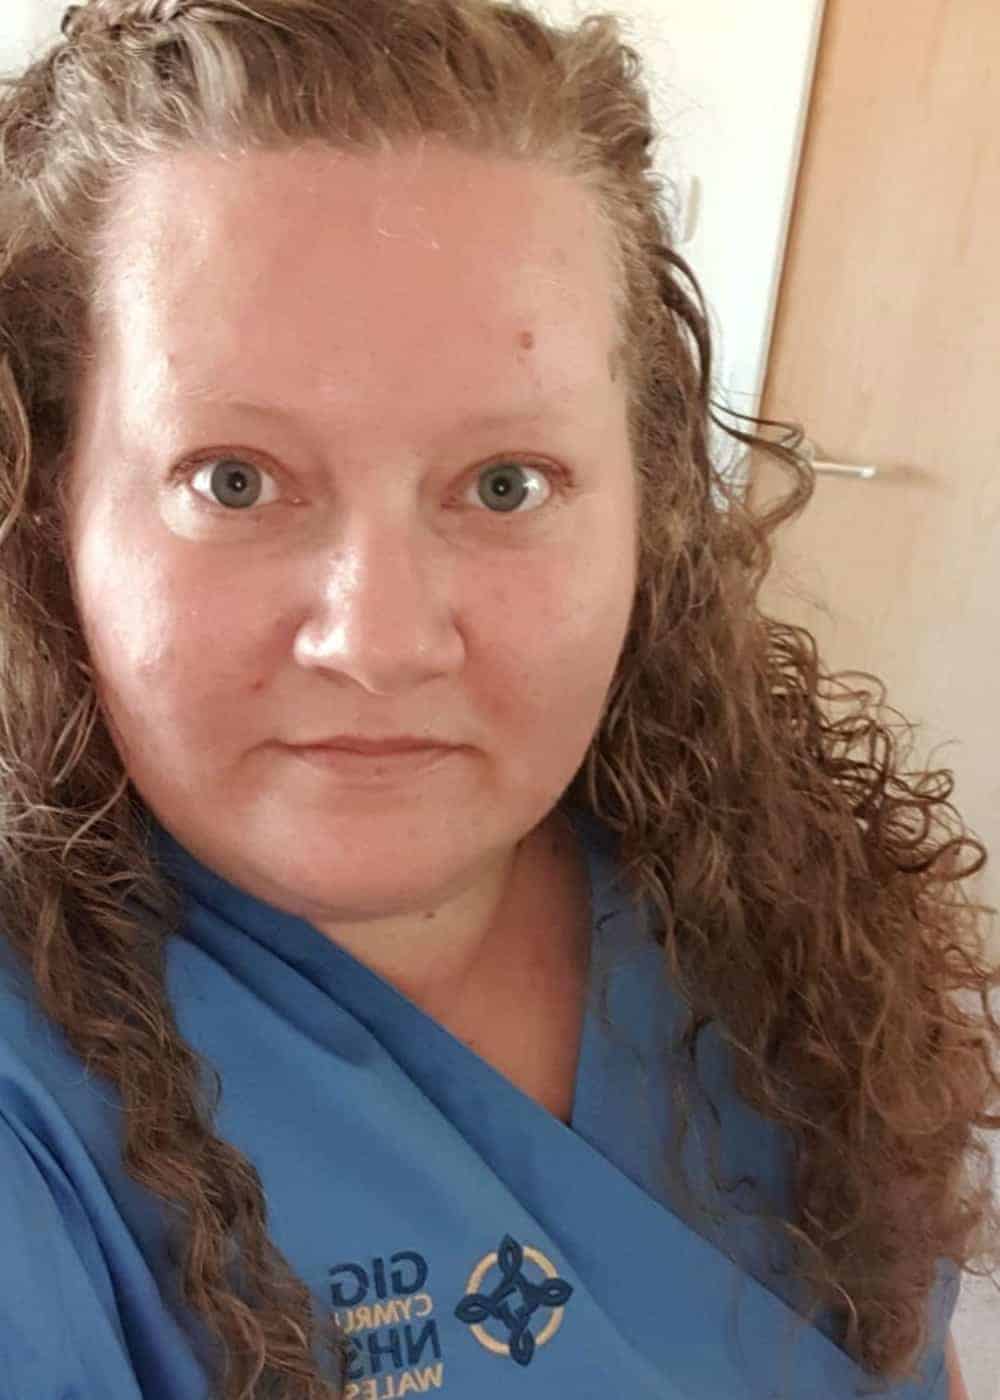 Ex-heroin addict turns life around by becoming NHS nurse